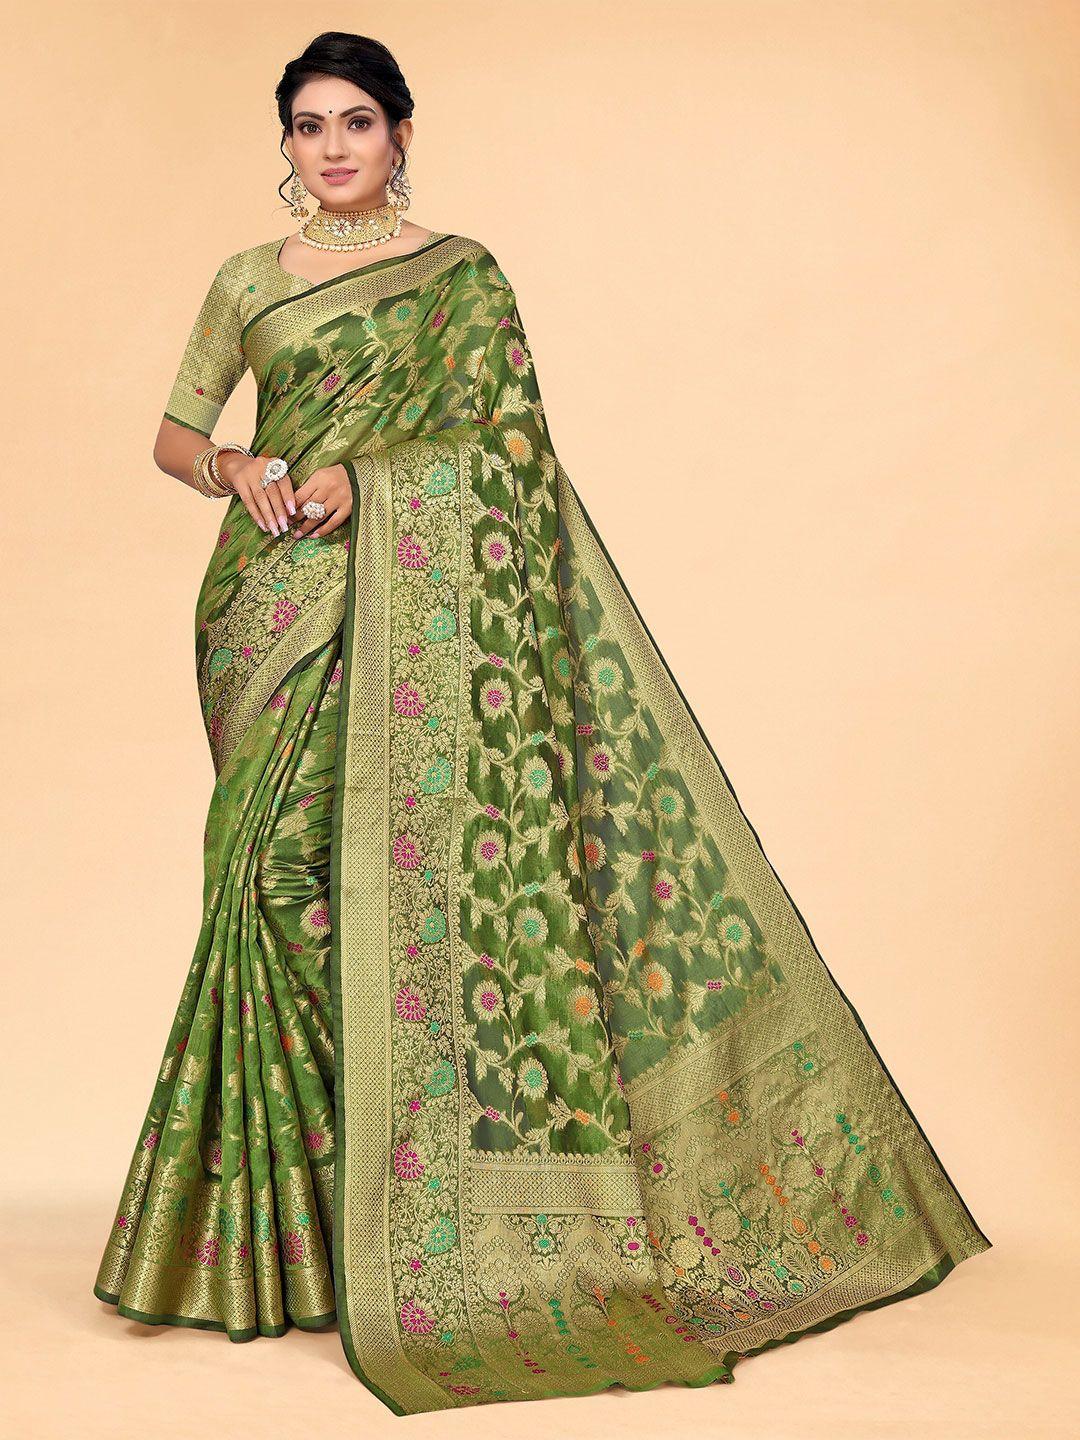 all-about-you-green-&-orange-floral-organza-saree